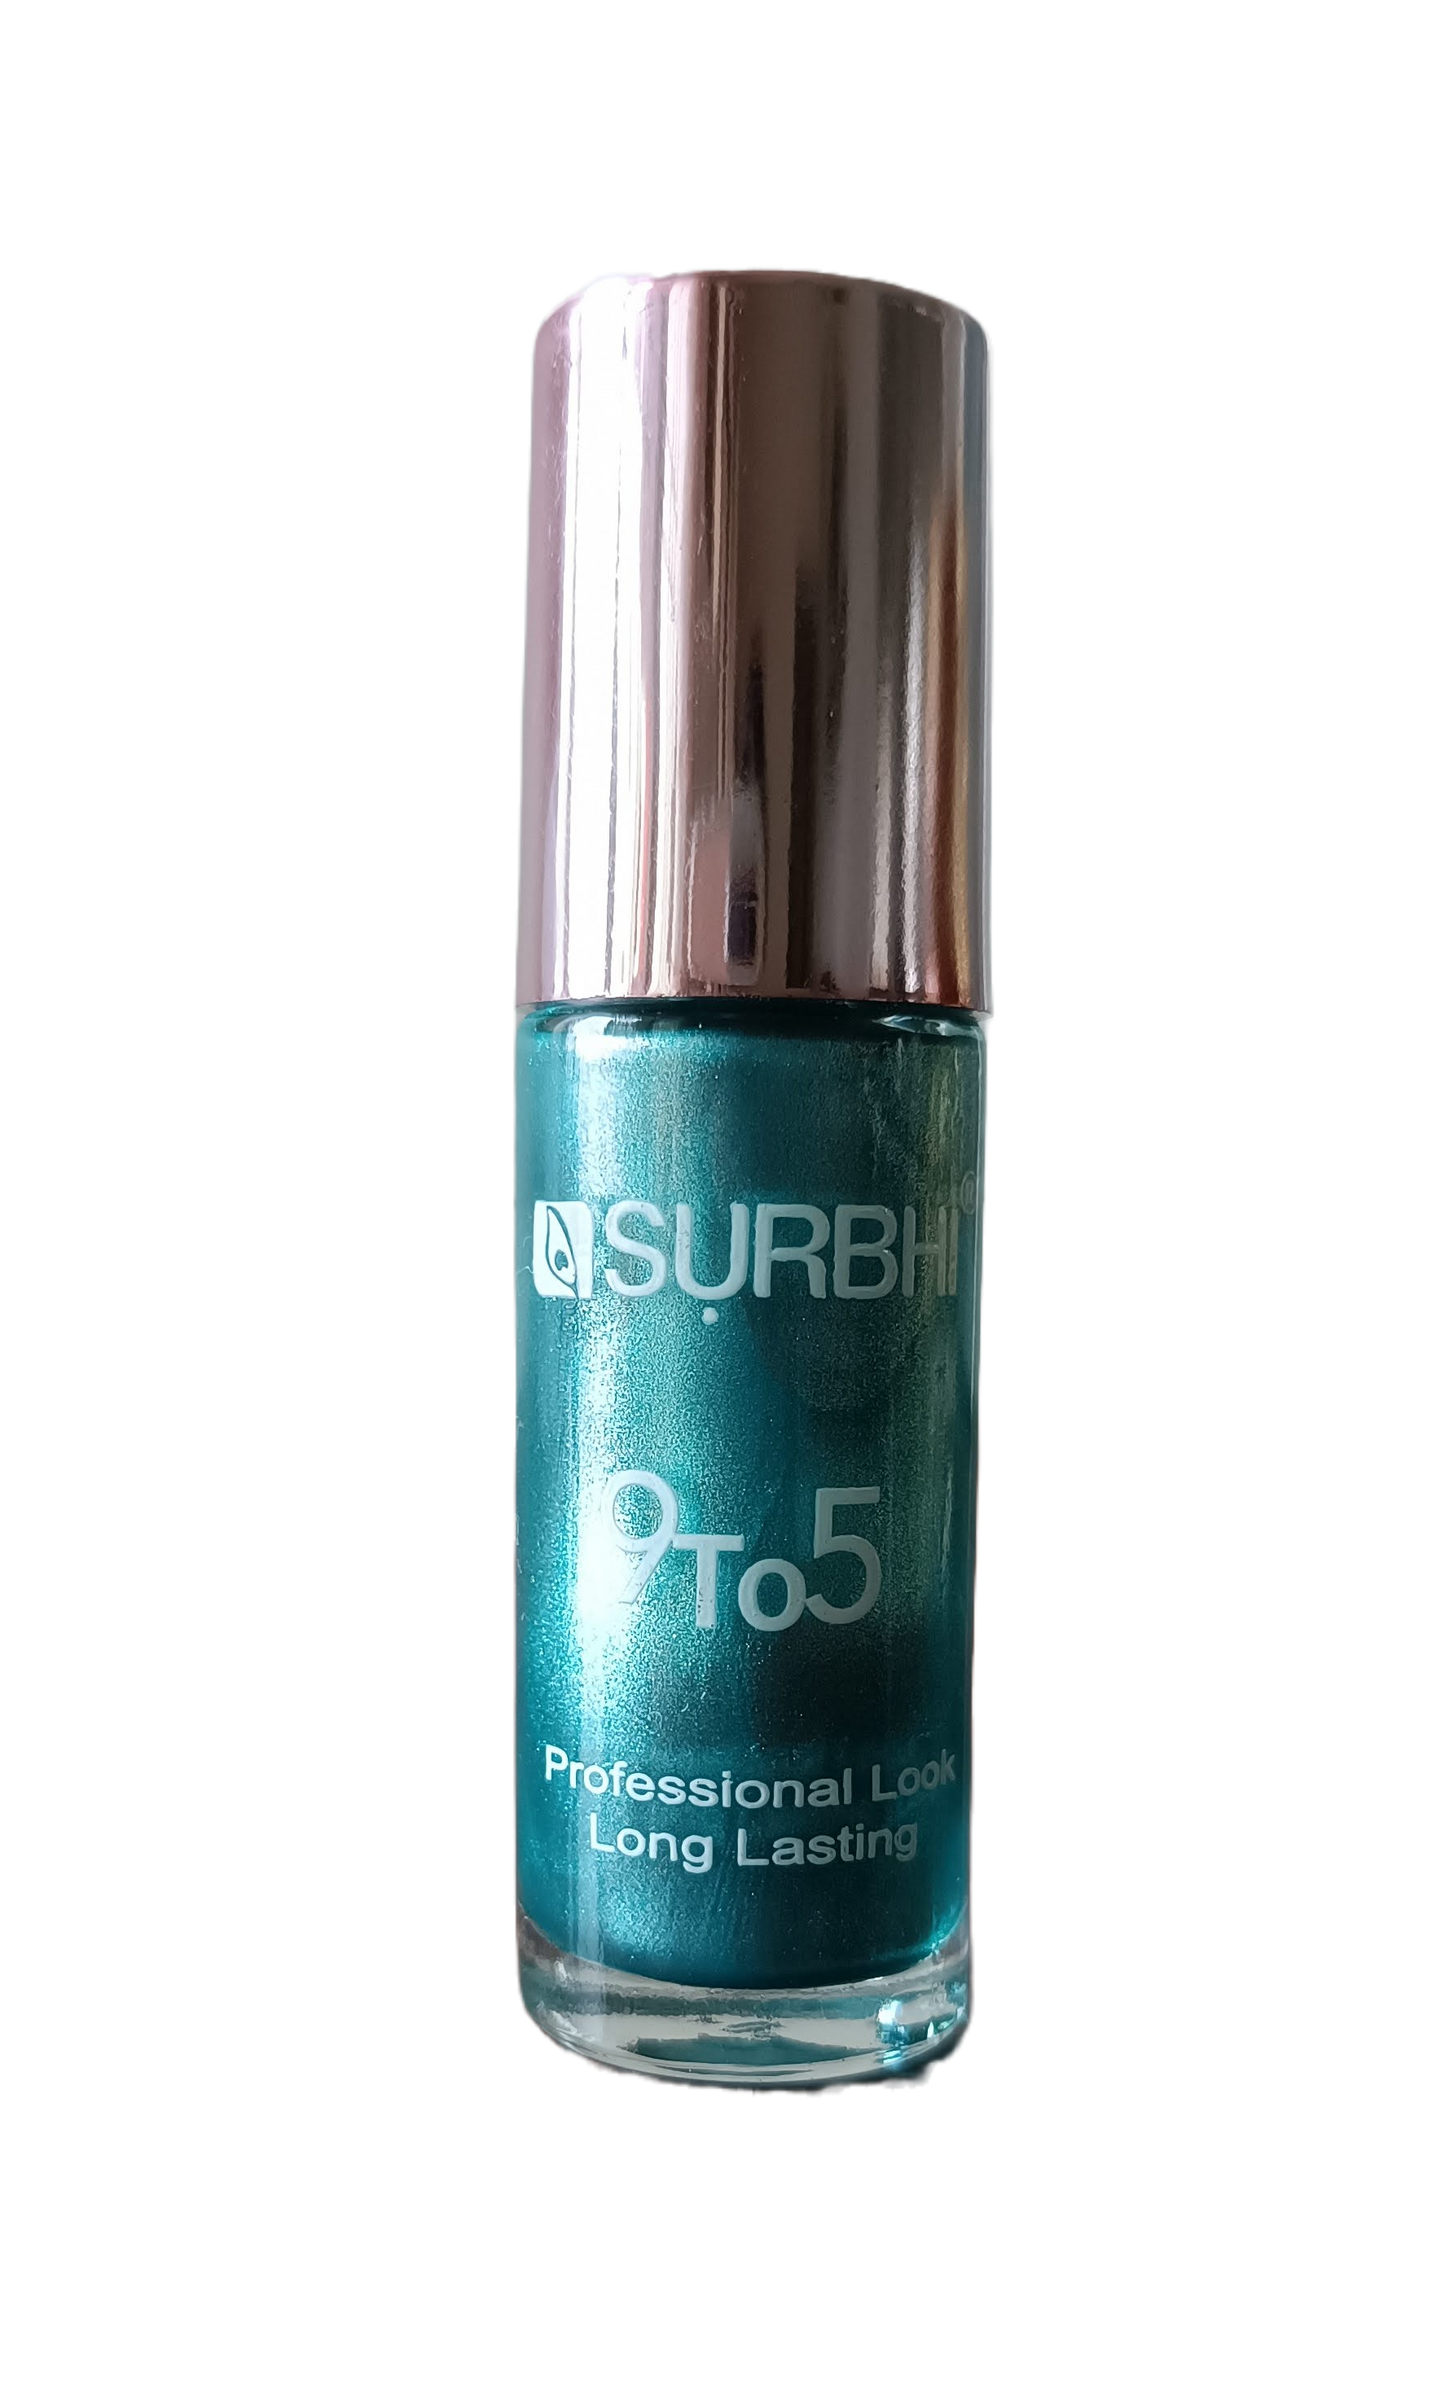 9 to 5 Professional Look Long Lasting Nail Paint - Glossy Green - 8 ml